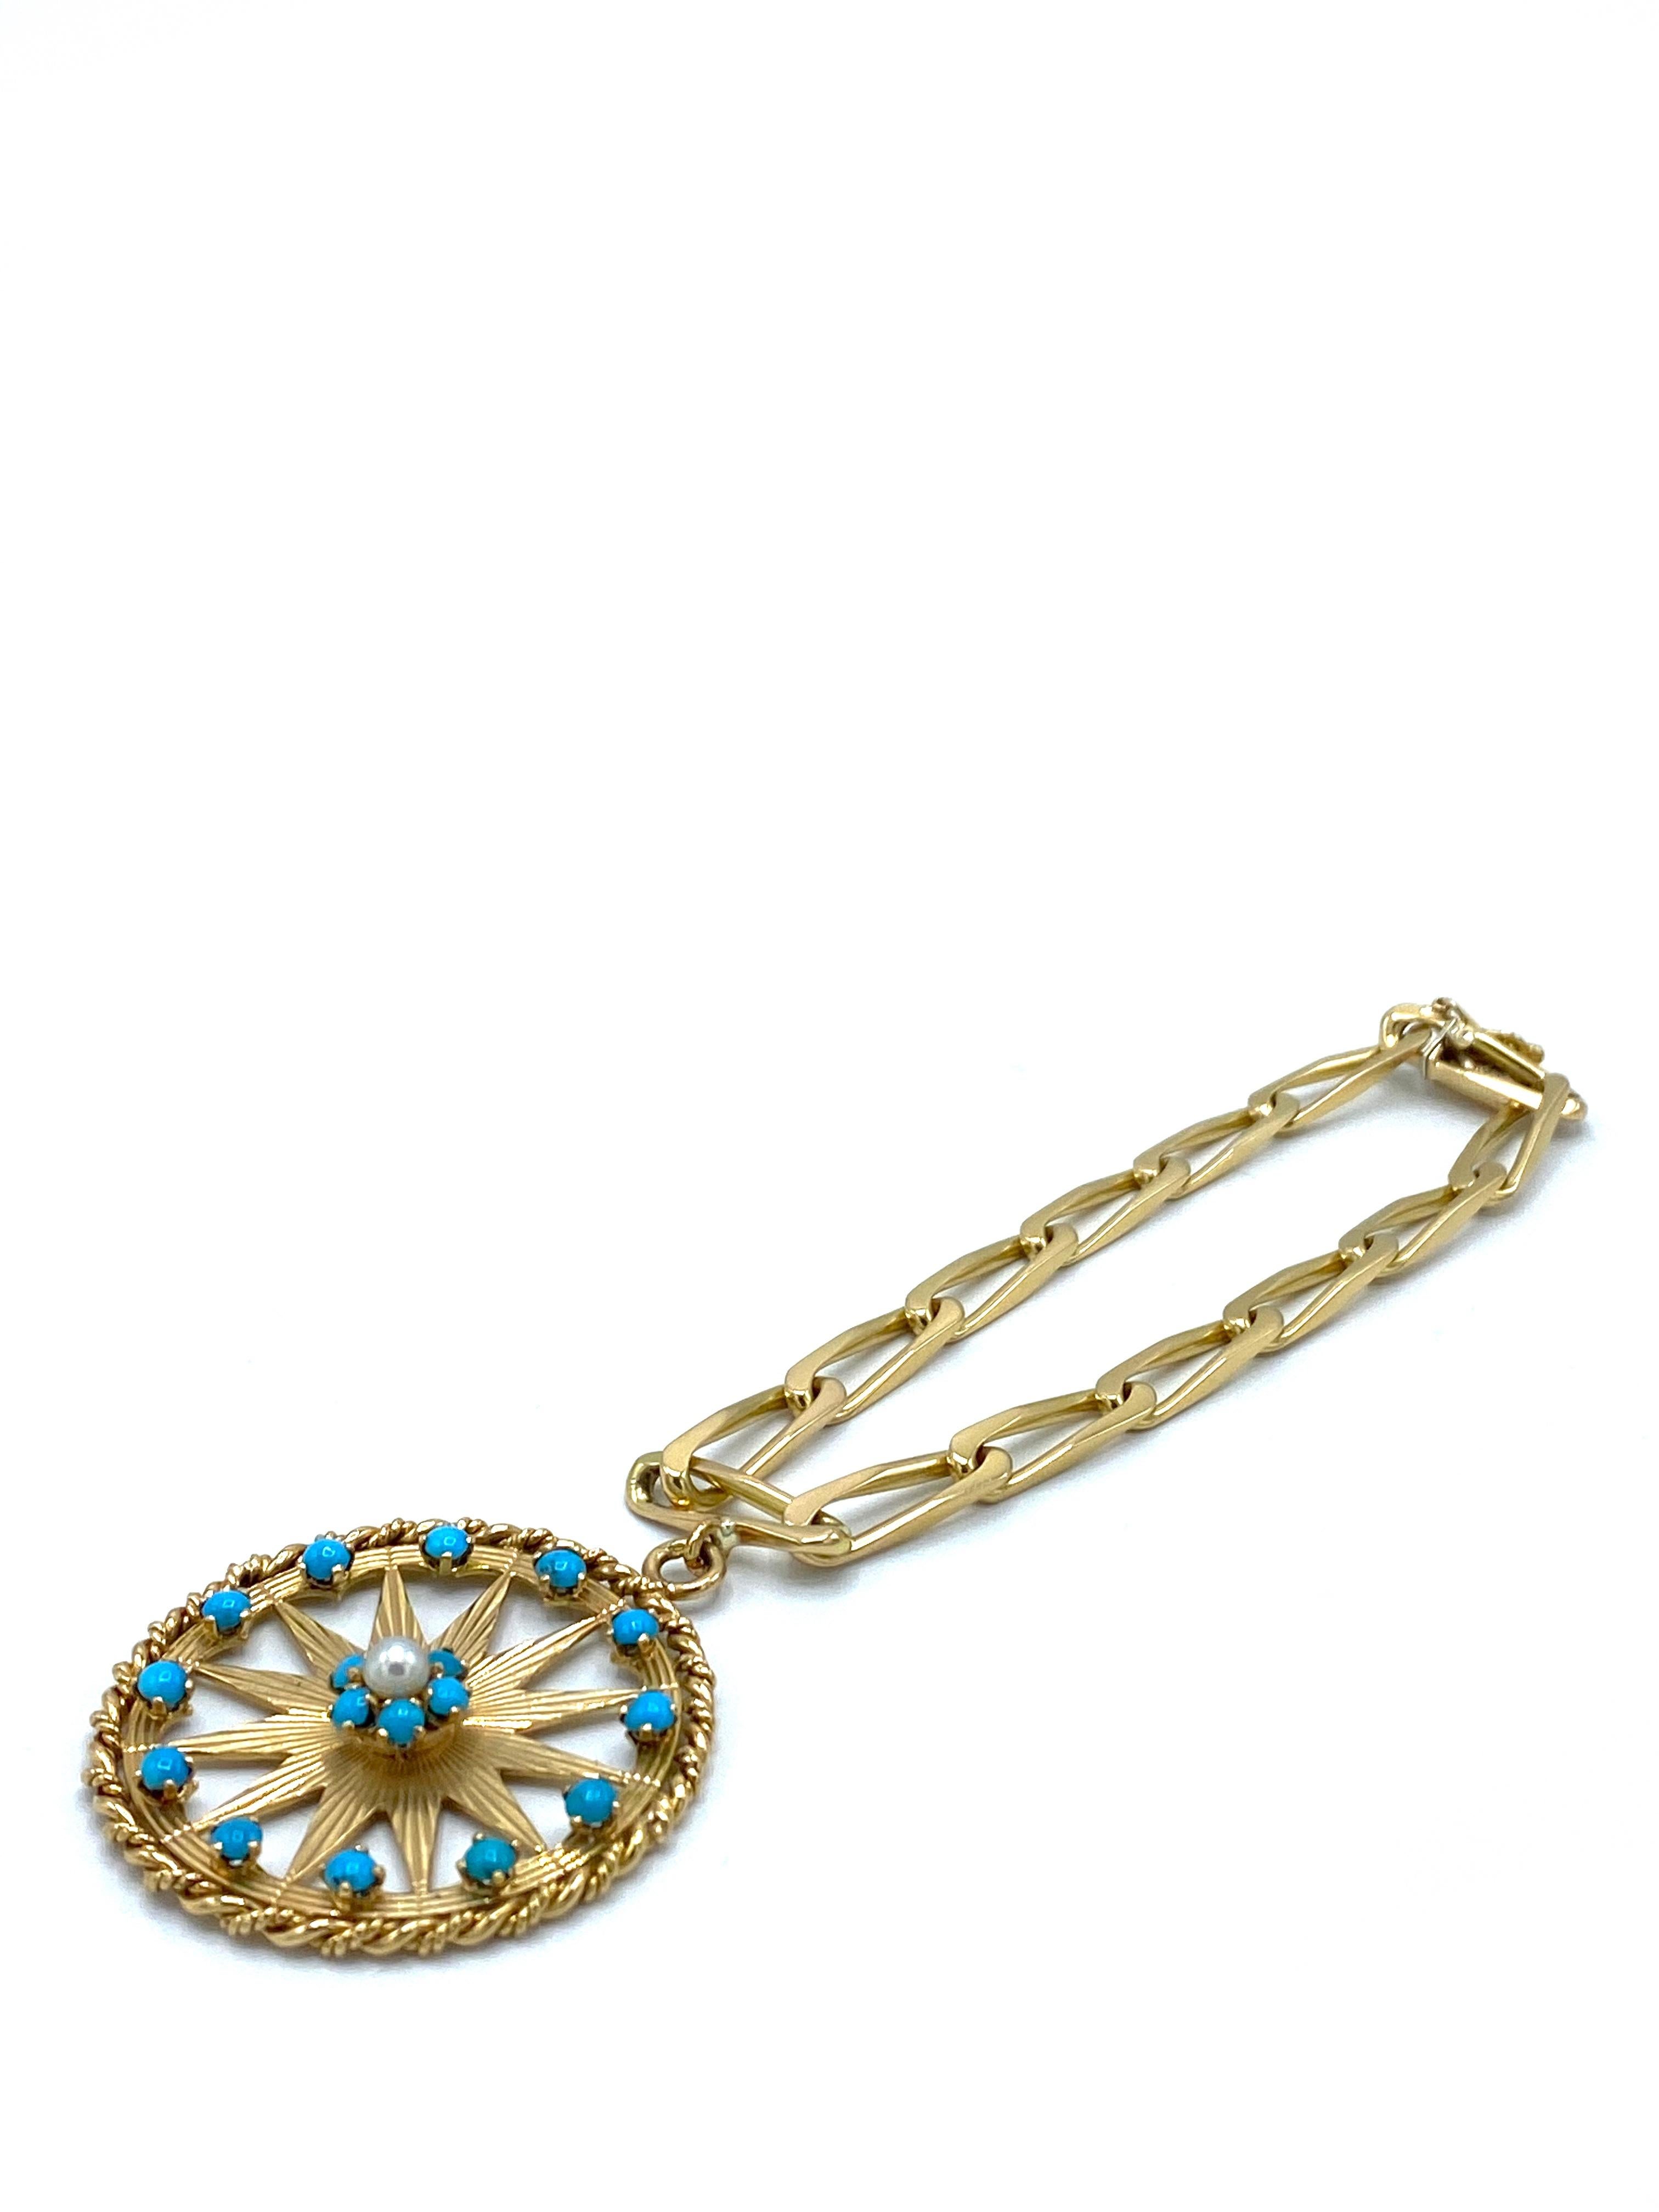 Product details:

1970s 18K yellow gold paper clip chain with box in clasp and safety, stamped with French eagle head mark.
1960s 18K yellow gold, turquoise and pearl, featuring pinwheel motif pendant, the bail is stamped with French eagle head